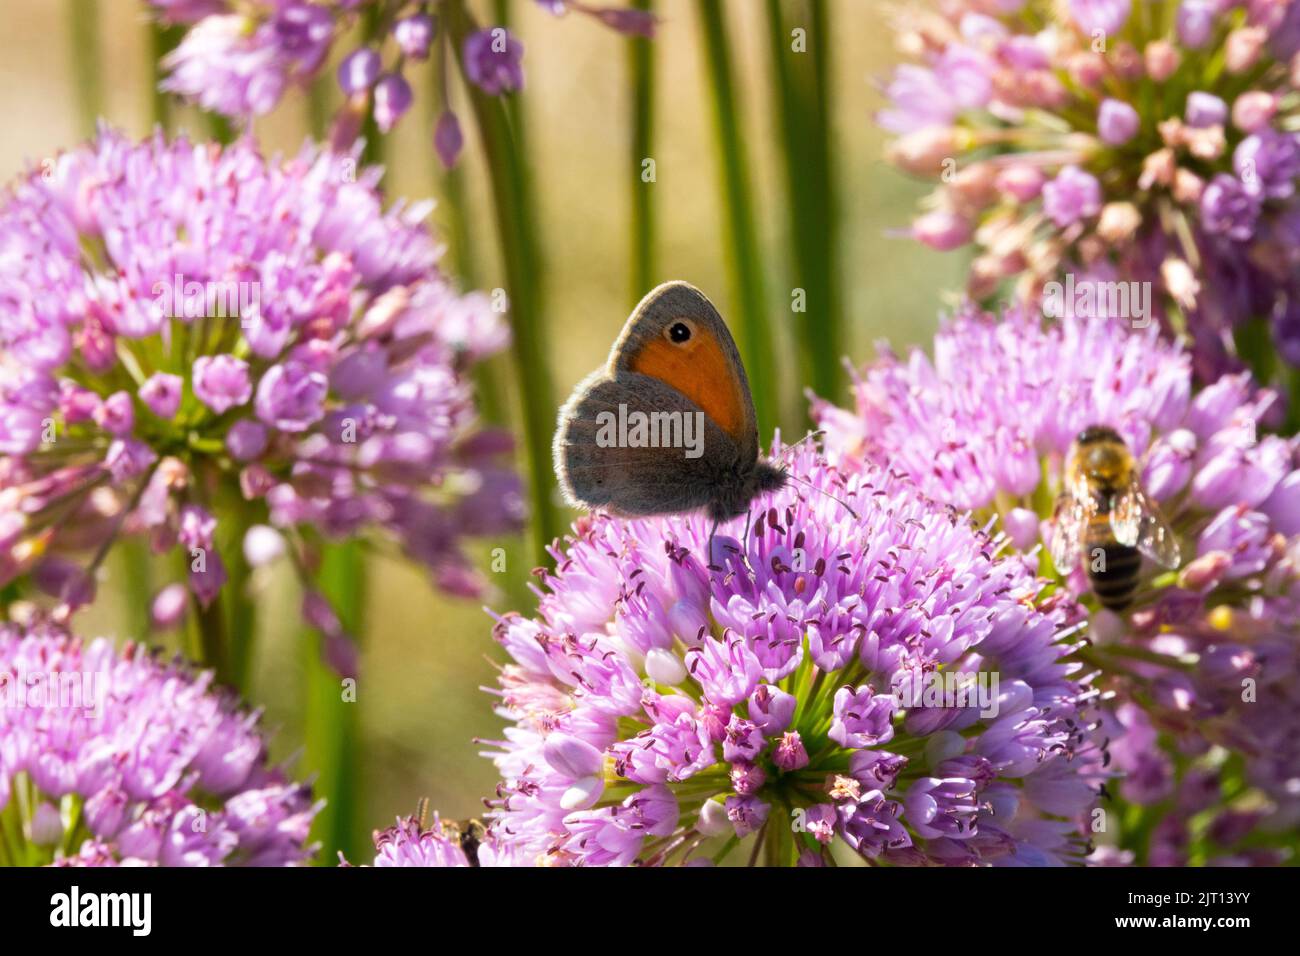 Butterfly on flower Allium senescens, Curly Chives, Mountain Garlic, Ornamental Onion, Butterfly feeding on a pink bloom side view wings Stock Photo